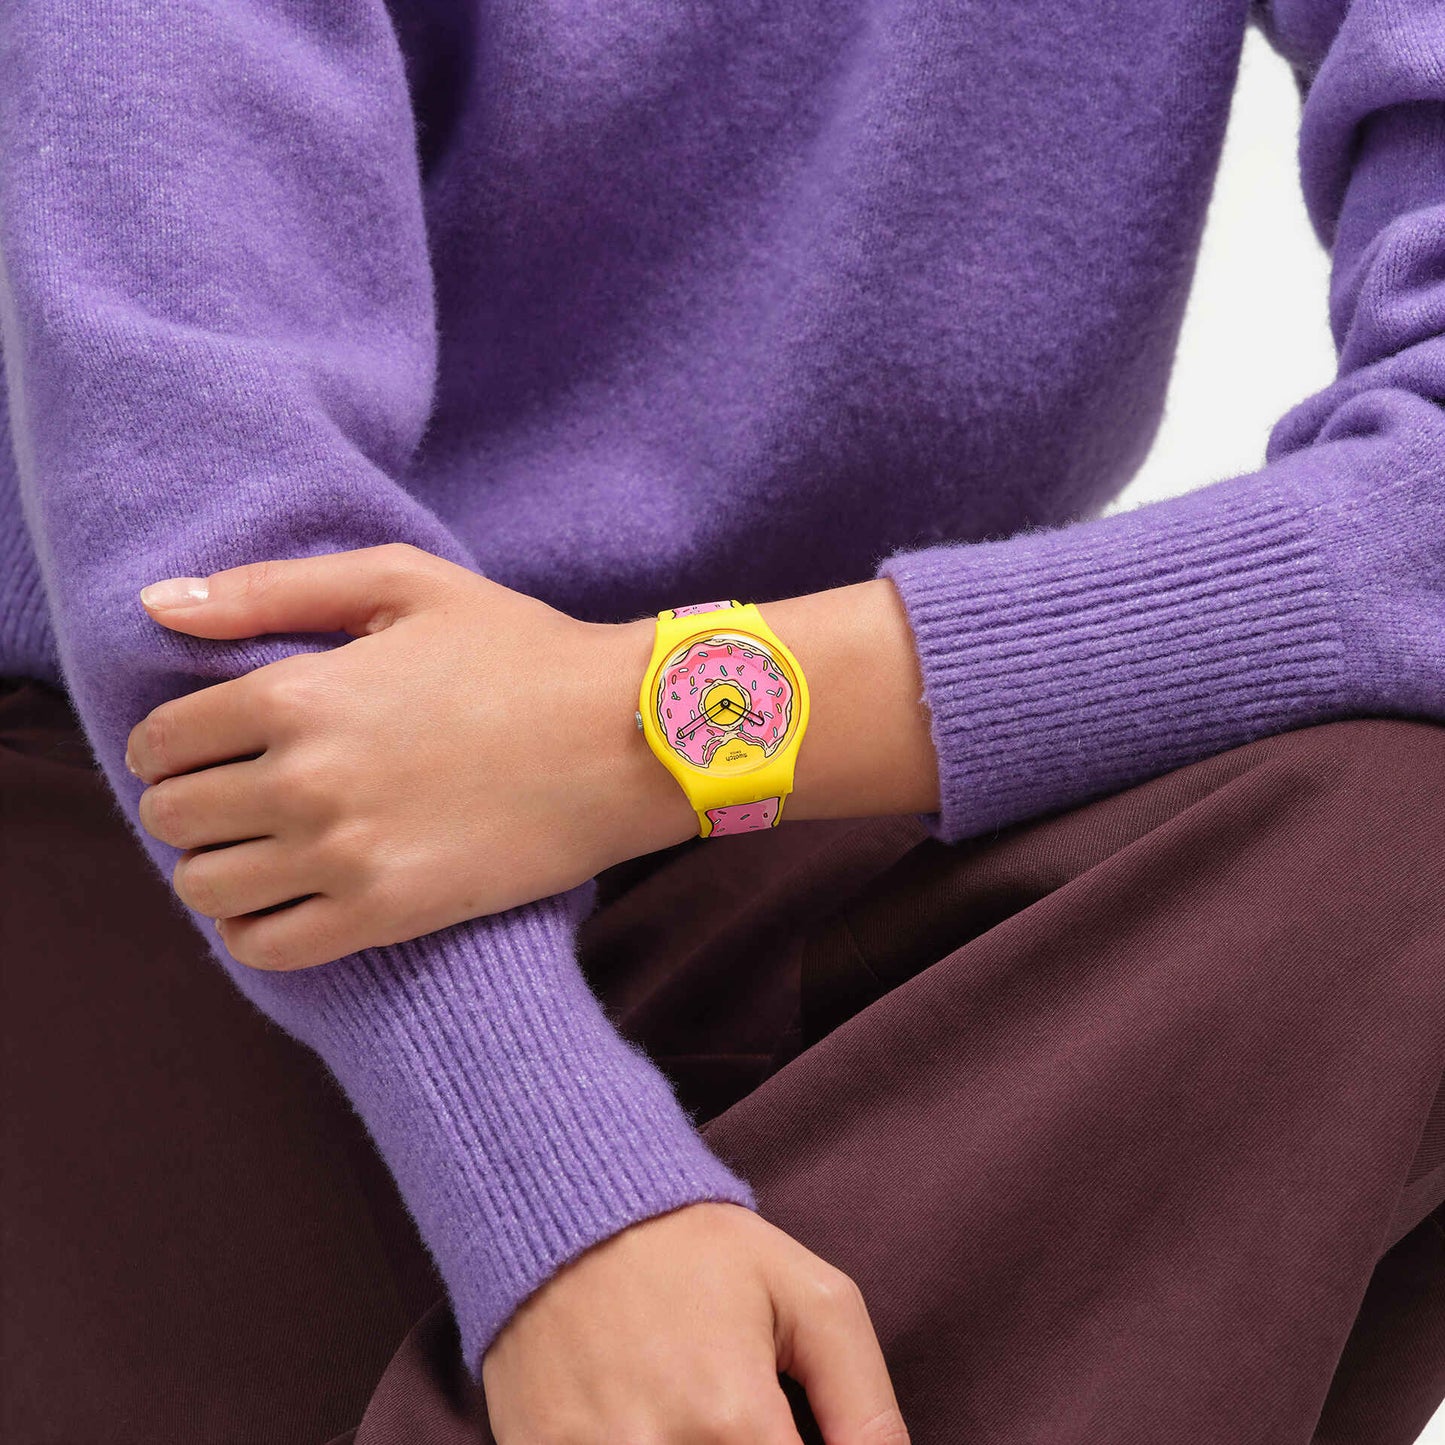 Swatch Seconds of Sweetness 41mm - Simpsons Collection